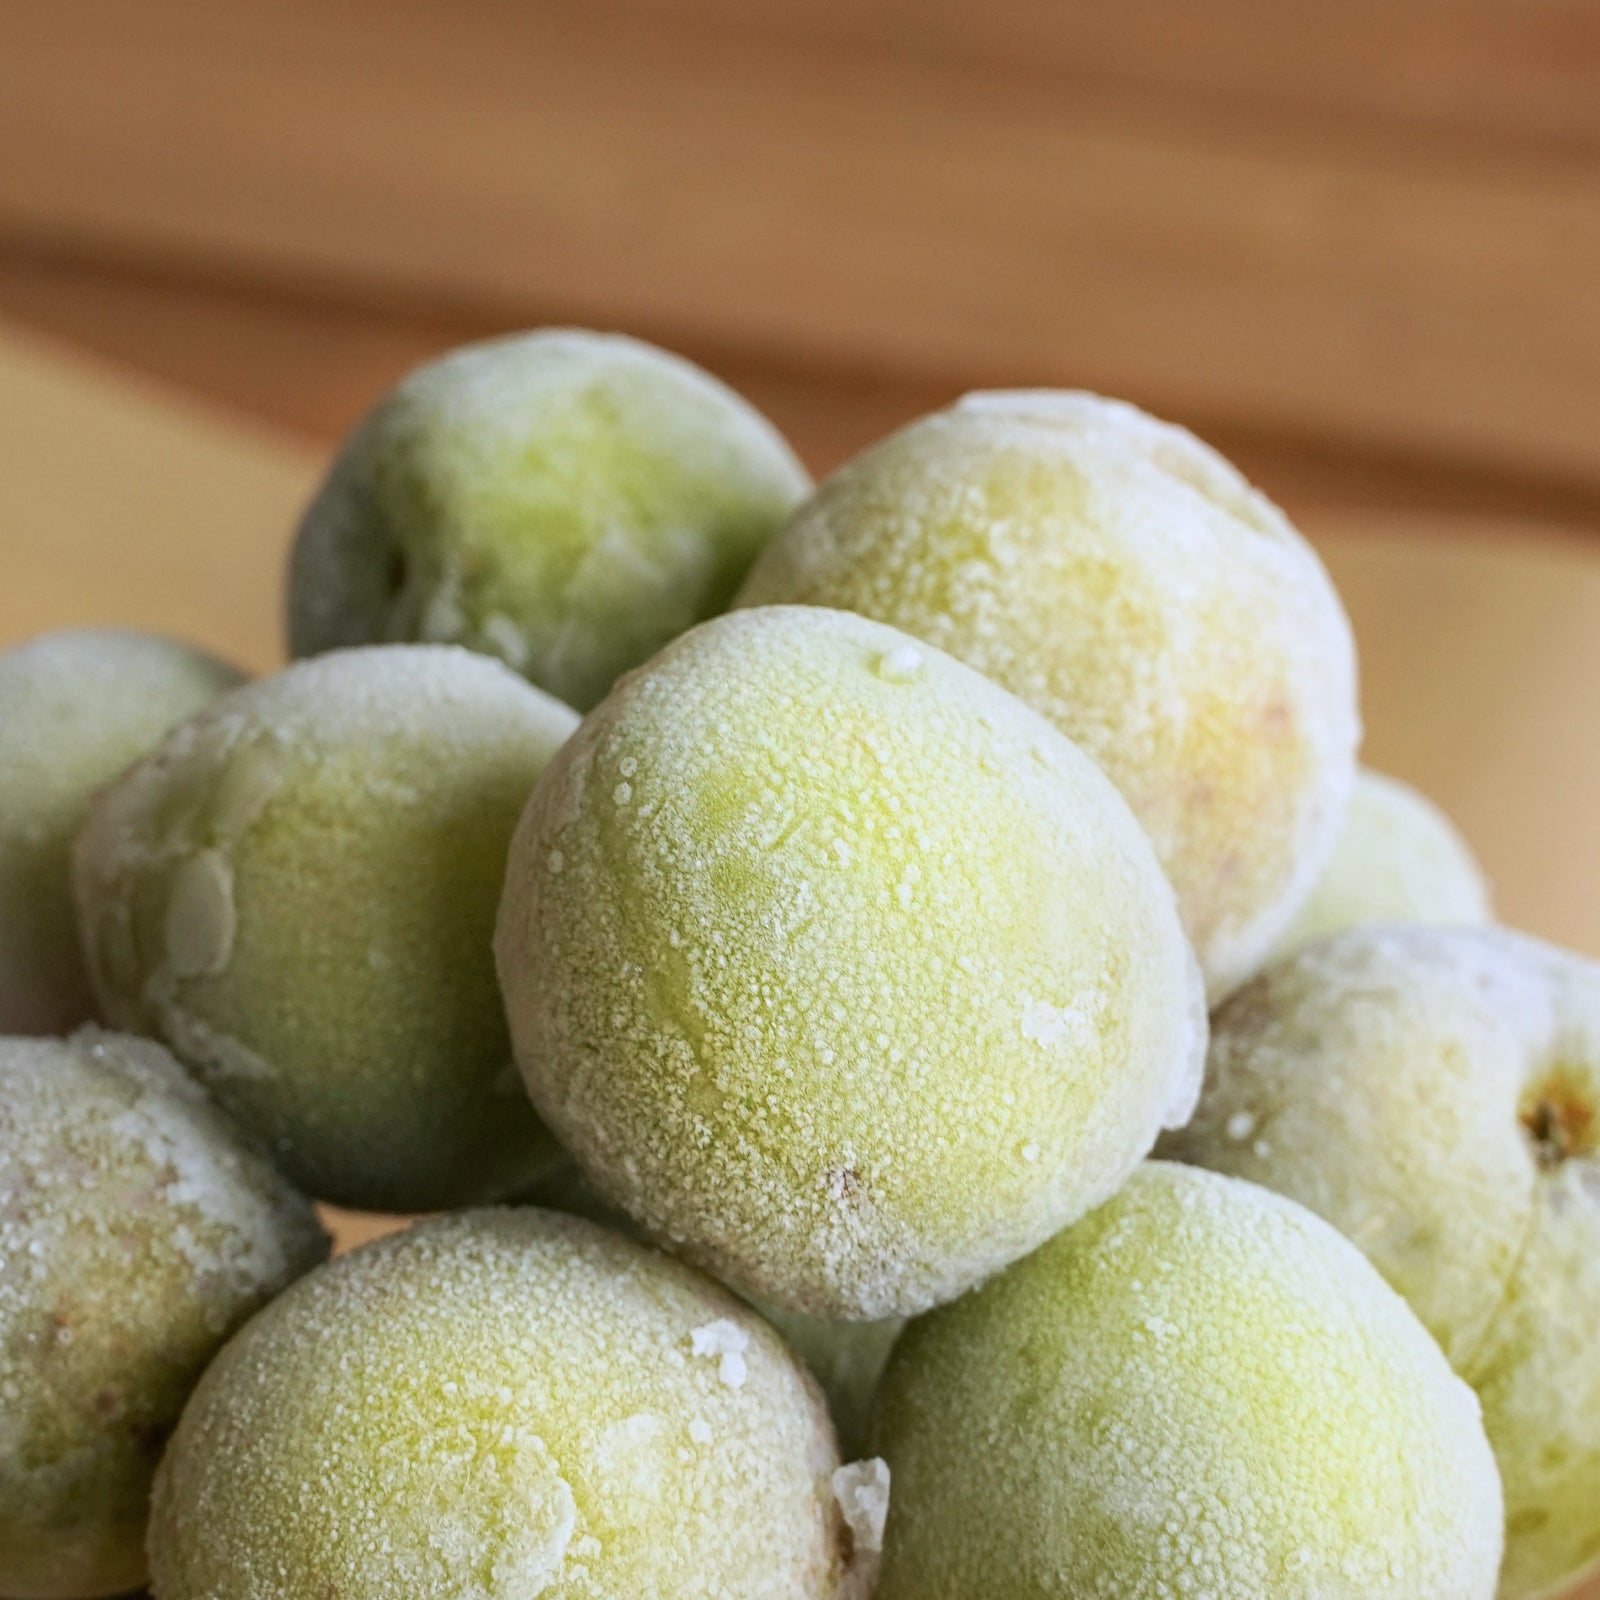 (Limited) Certified Organic Frozen Green Plums from Japan (1kg) - Horizon Farms